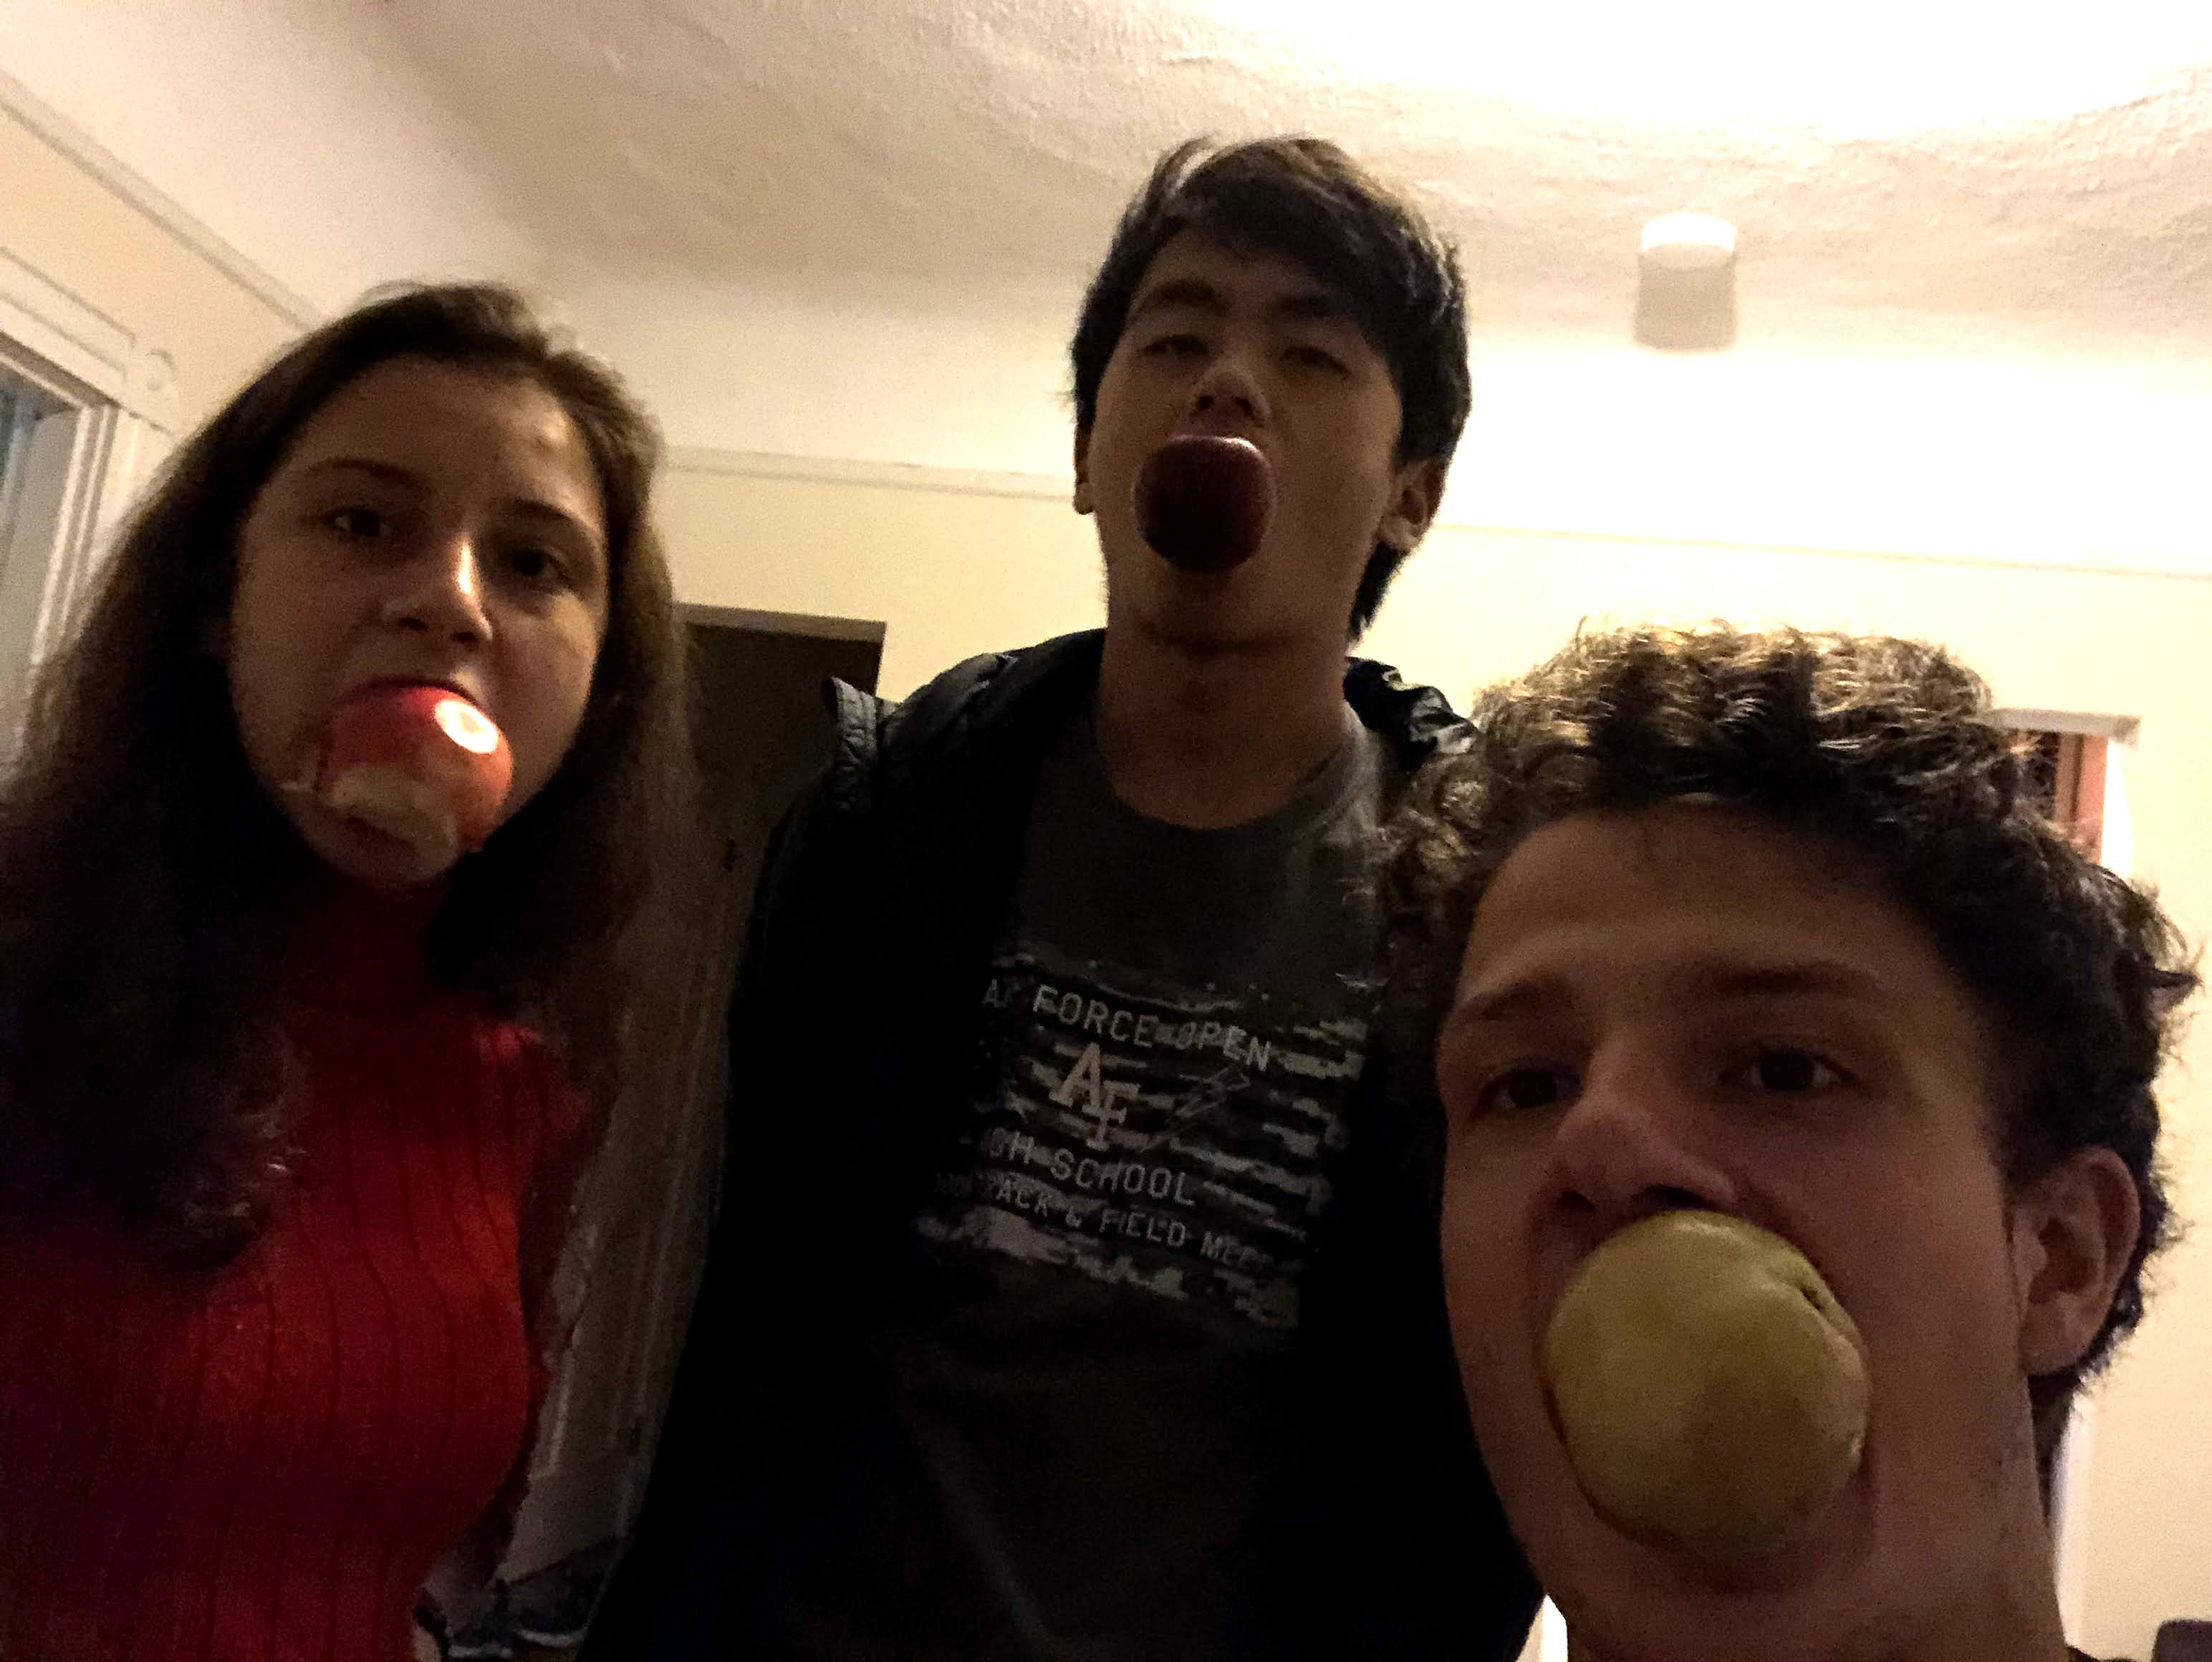 All of us eating apples